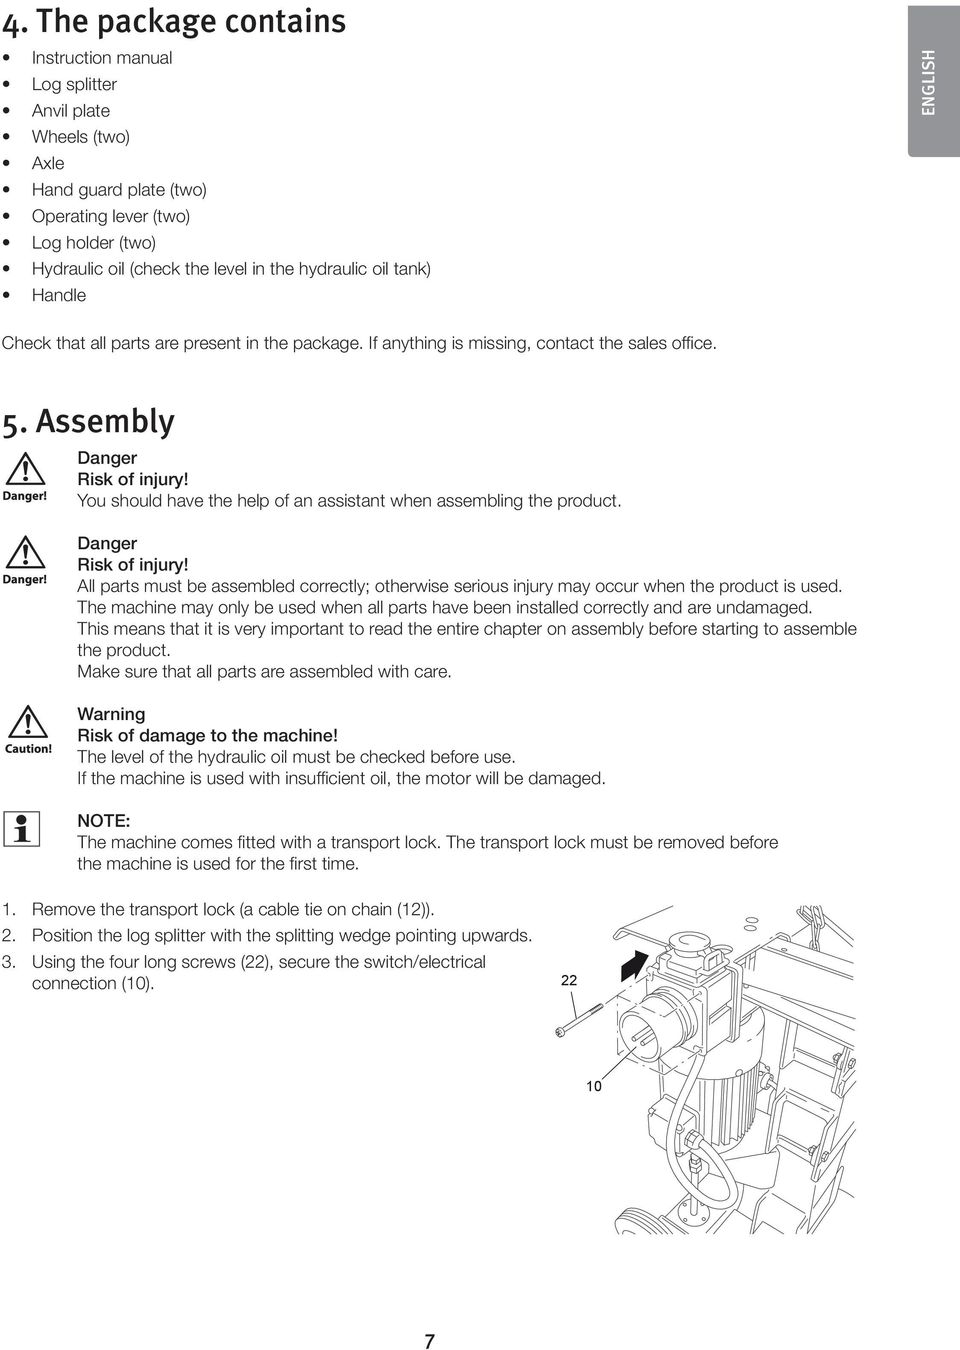 You should have the help of an assistant when assembling the product. Danger Risk of injury! All parts must be assembled correctly; otherwise serious injury may occur when the product is used.